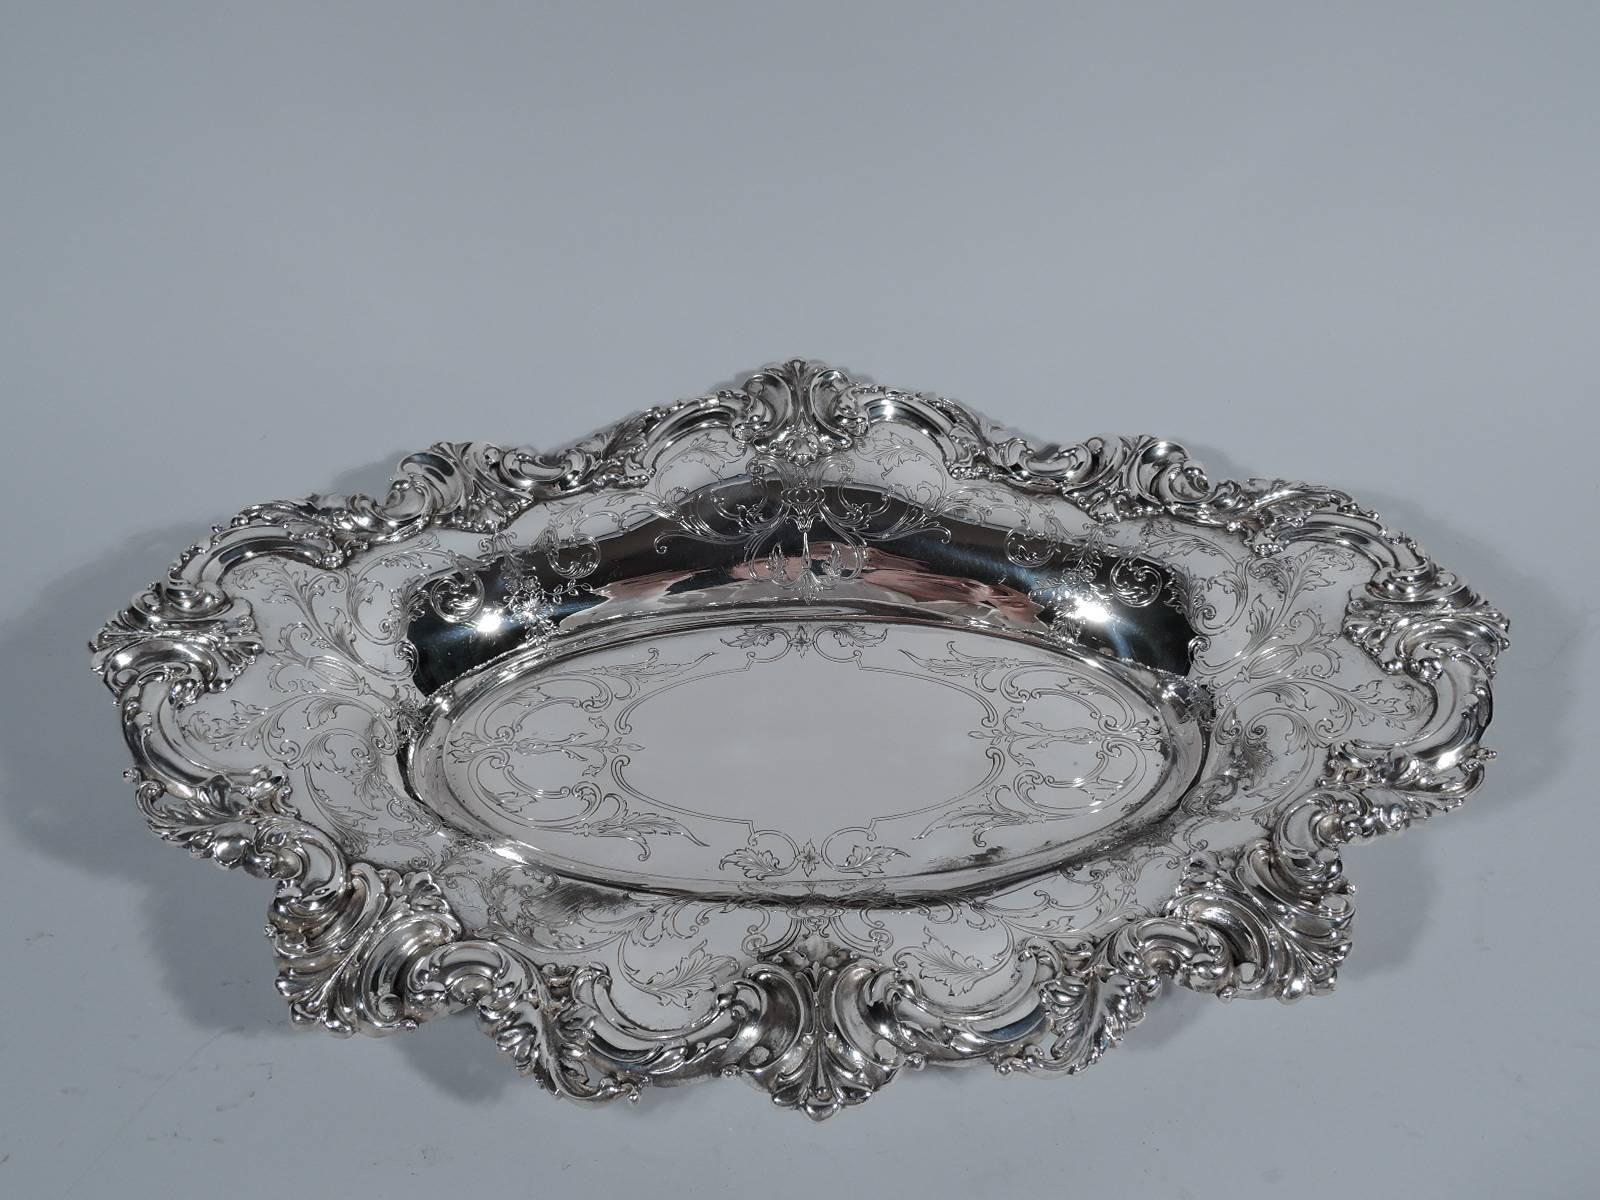 Beautiful and sumptuous sterling silver bread tray. Made by Shreve & Co. in San Francisco, circa 1900. Oval well with wavy rim. Engraved scrolls, flowers, and foliage. Substantial leaves and scrolls applied to rim. Hallmarked. Extra heavy weight: